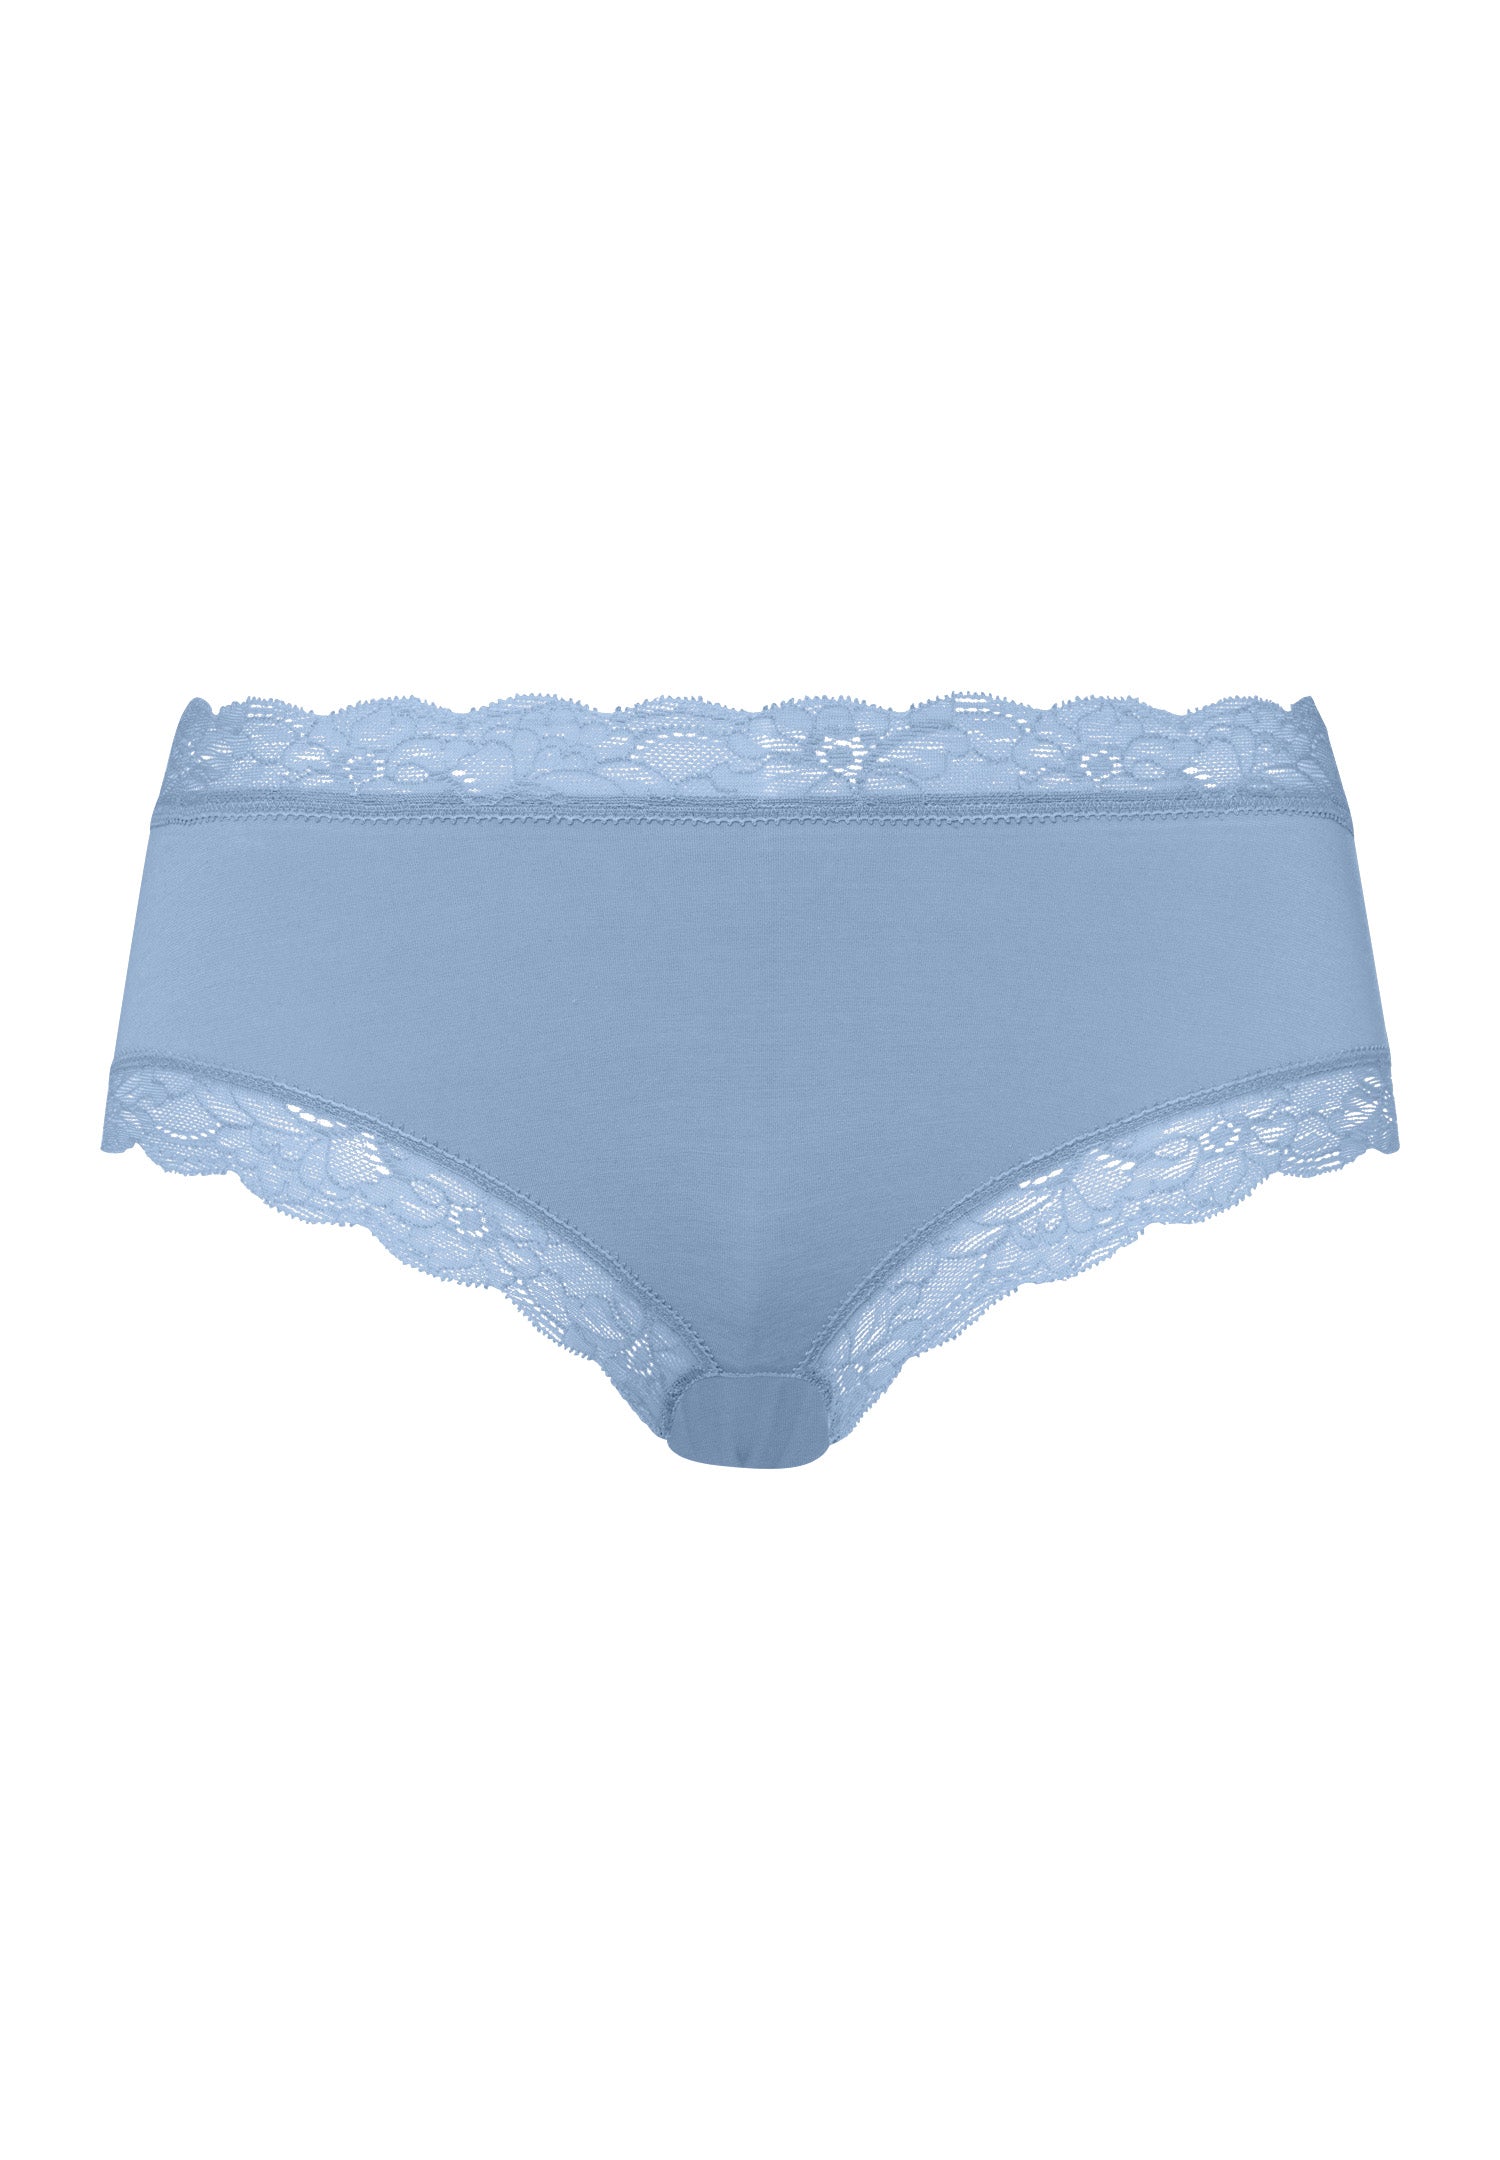 72438 Cotton Lace Hipster - 1592 Blue Moon